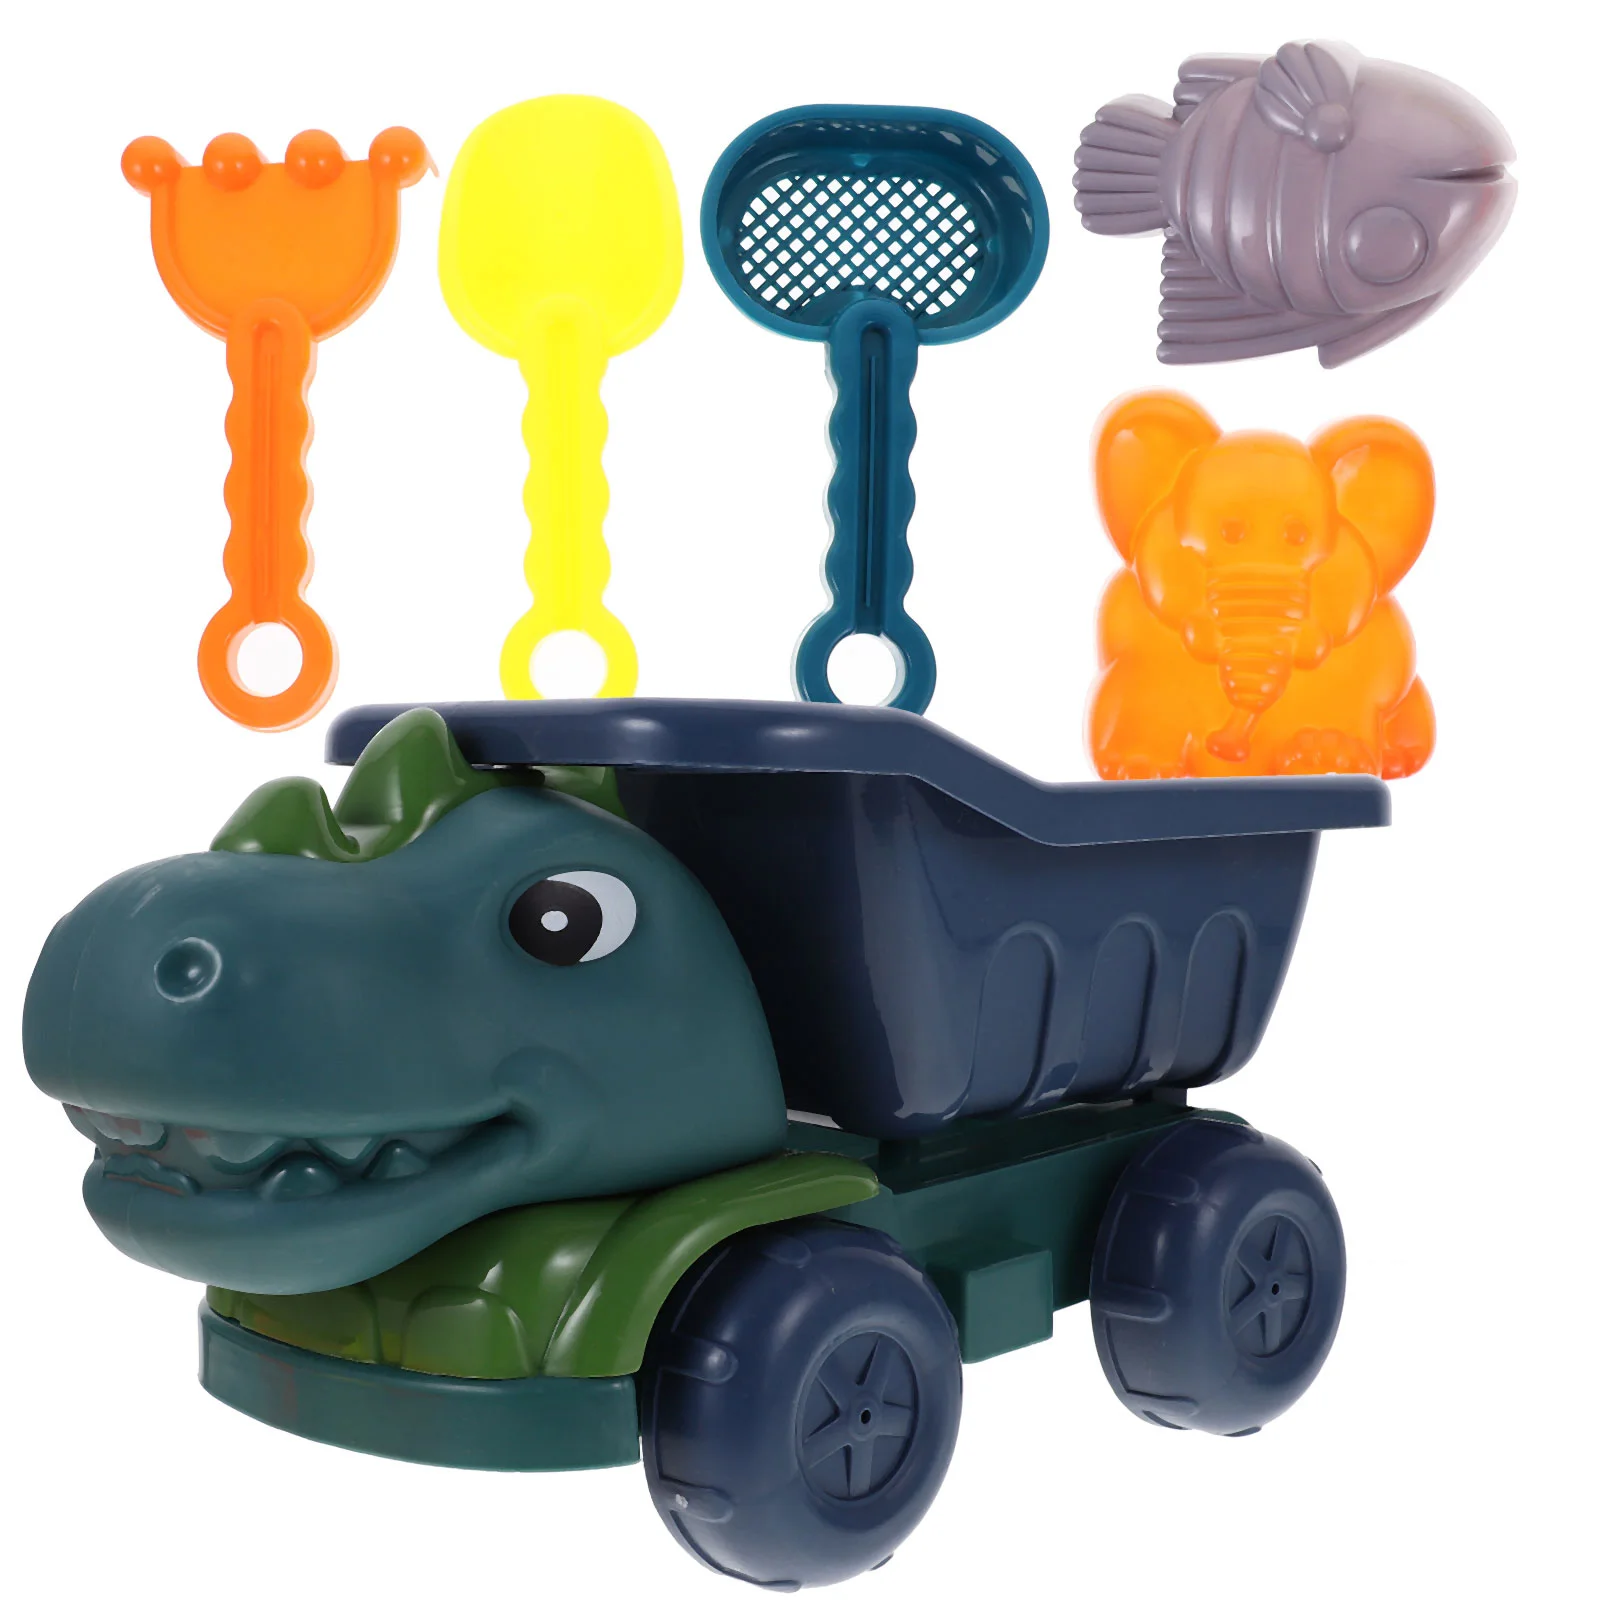 

S Sand Beach Kidsset Digging Outdoor Dinosaur Castle Summer Toys Summer Play Children Mold Playing For Gardening Baby